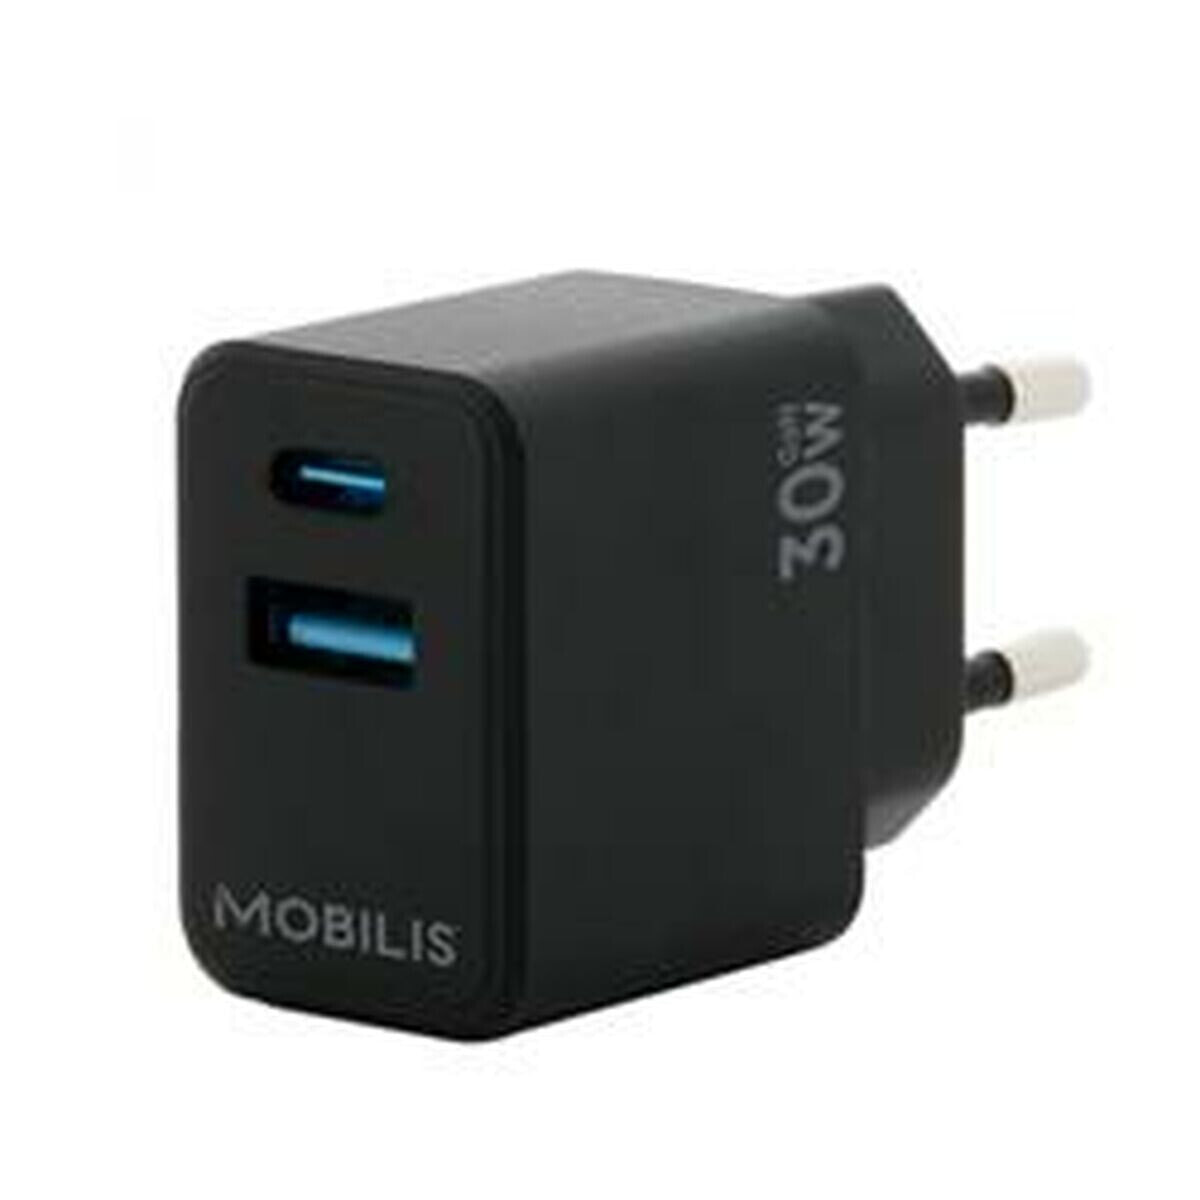 Wall Charger Mobilis 001362 Black 30 W